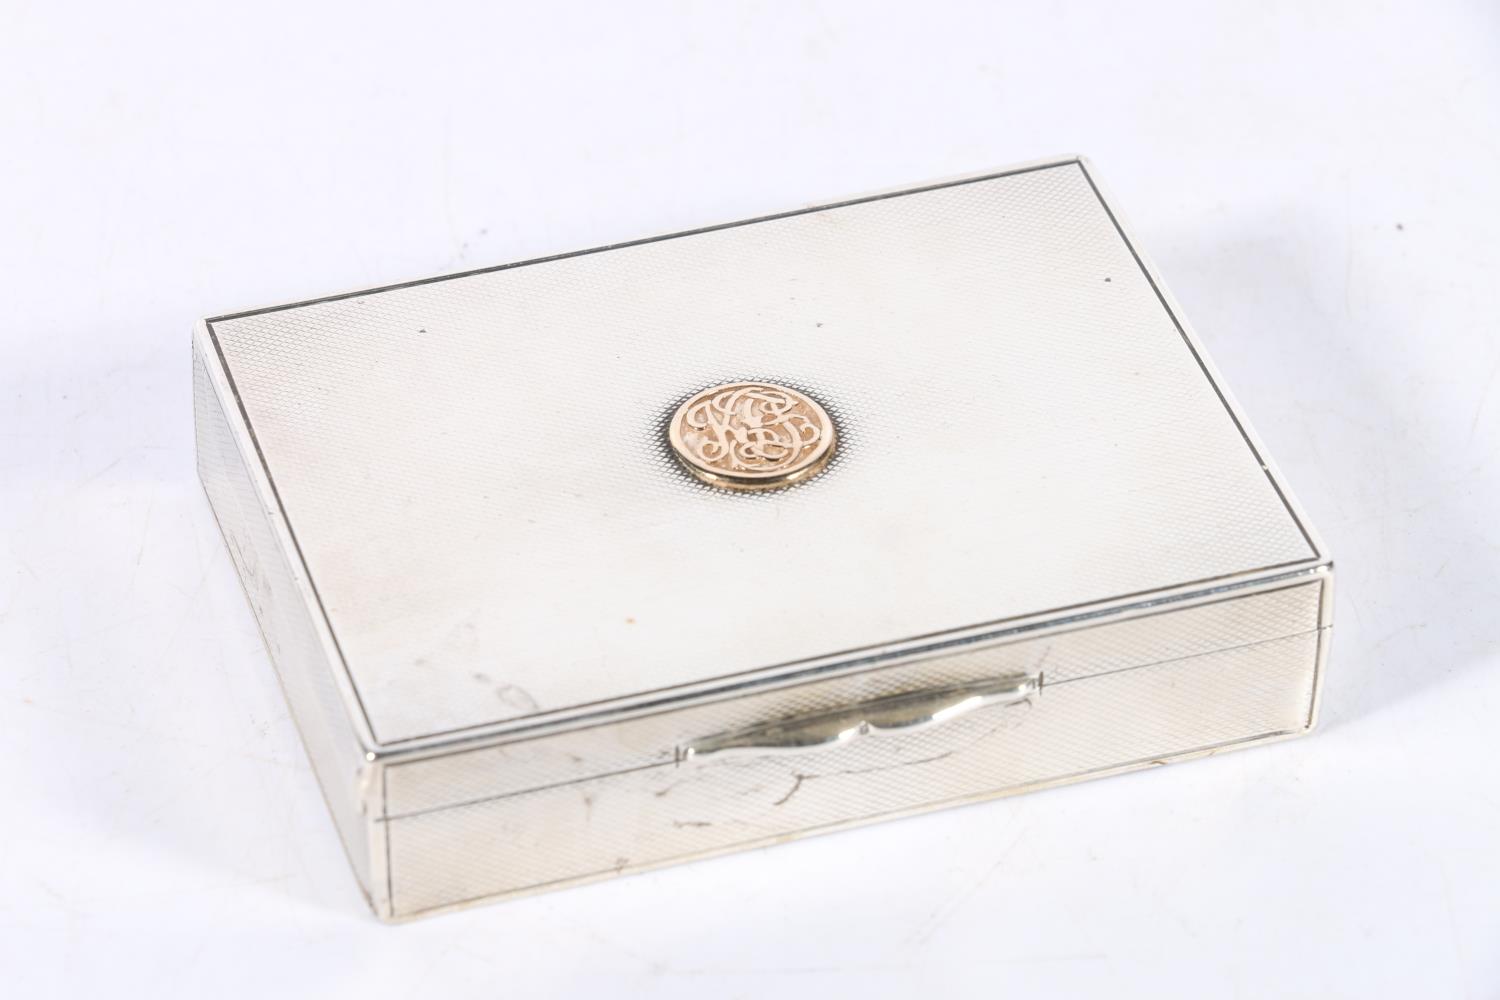 Edwardian silver cigarette box with engine turned decoration and applied crest by Frederick Thomas